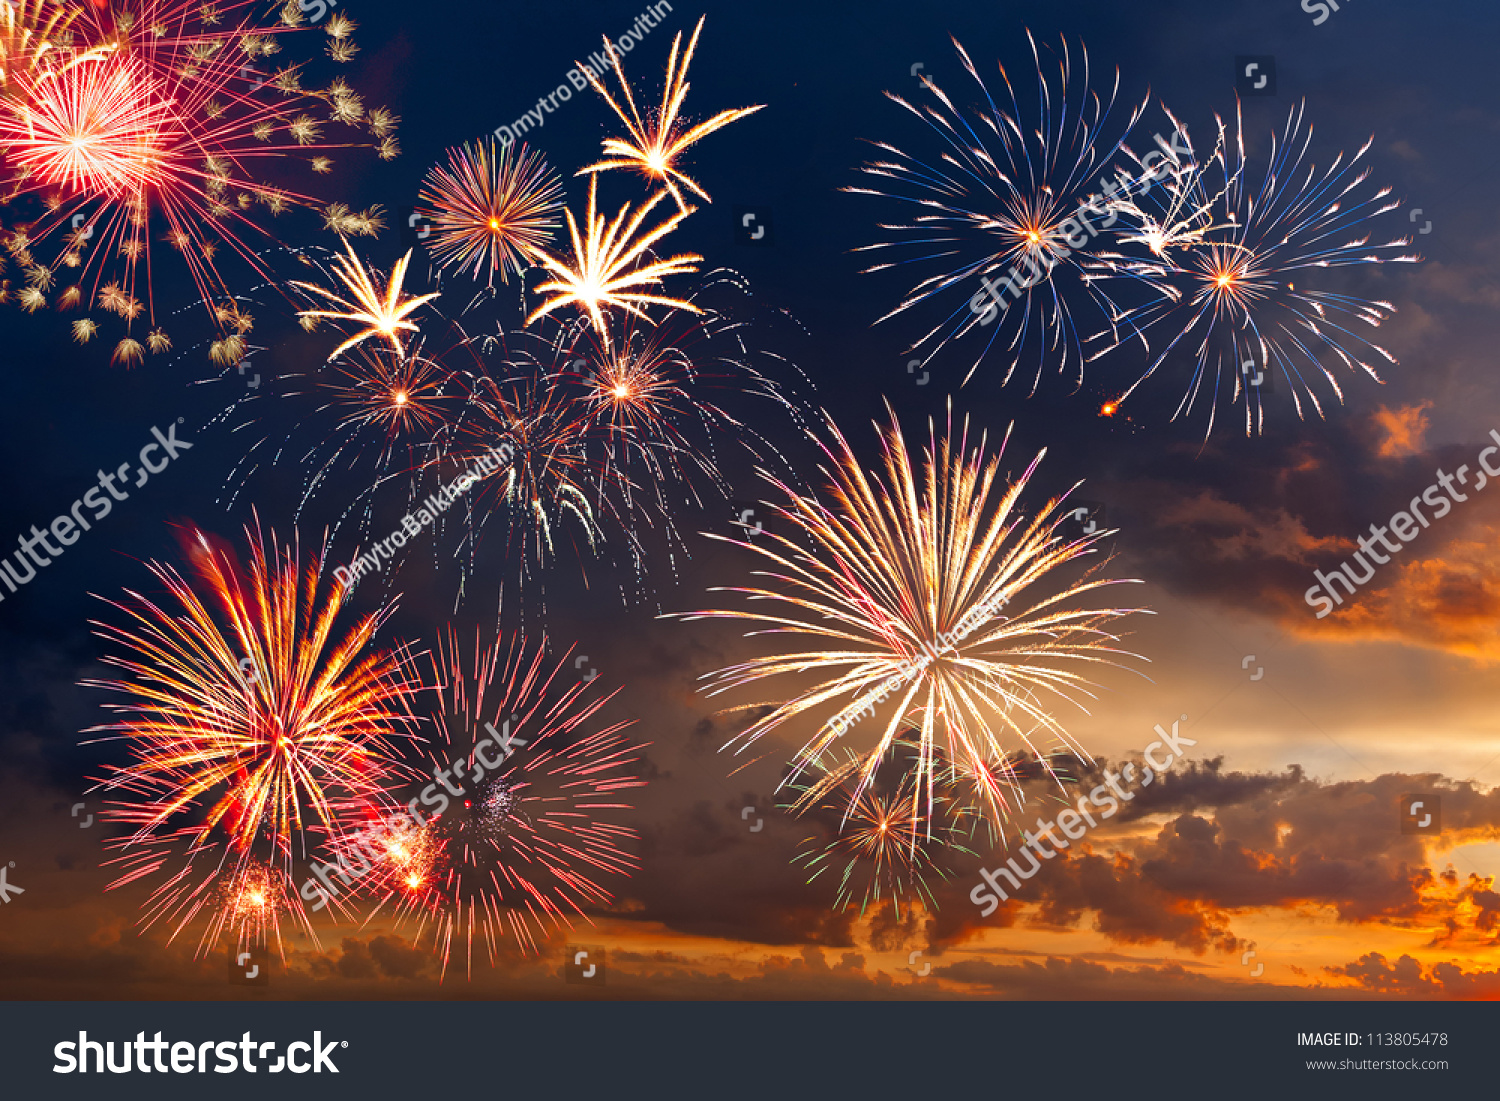 Beautiful colorful holiday fireworks in the evening sky with majestic clouds,  long exposure #113805478